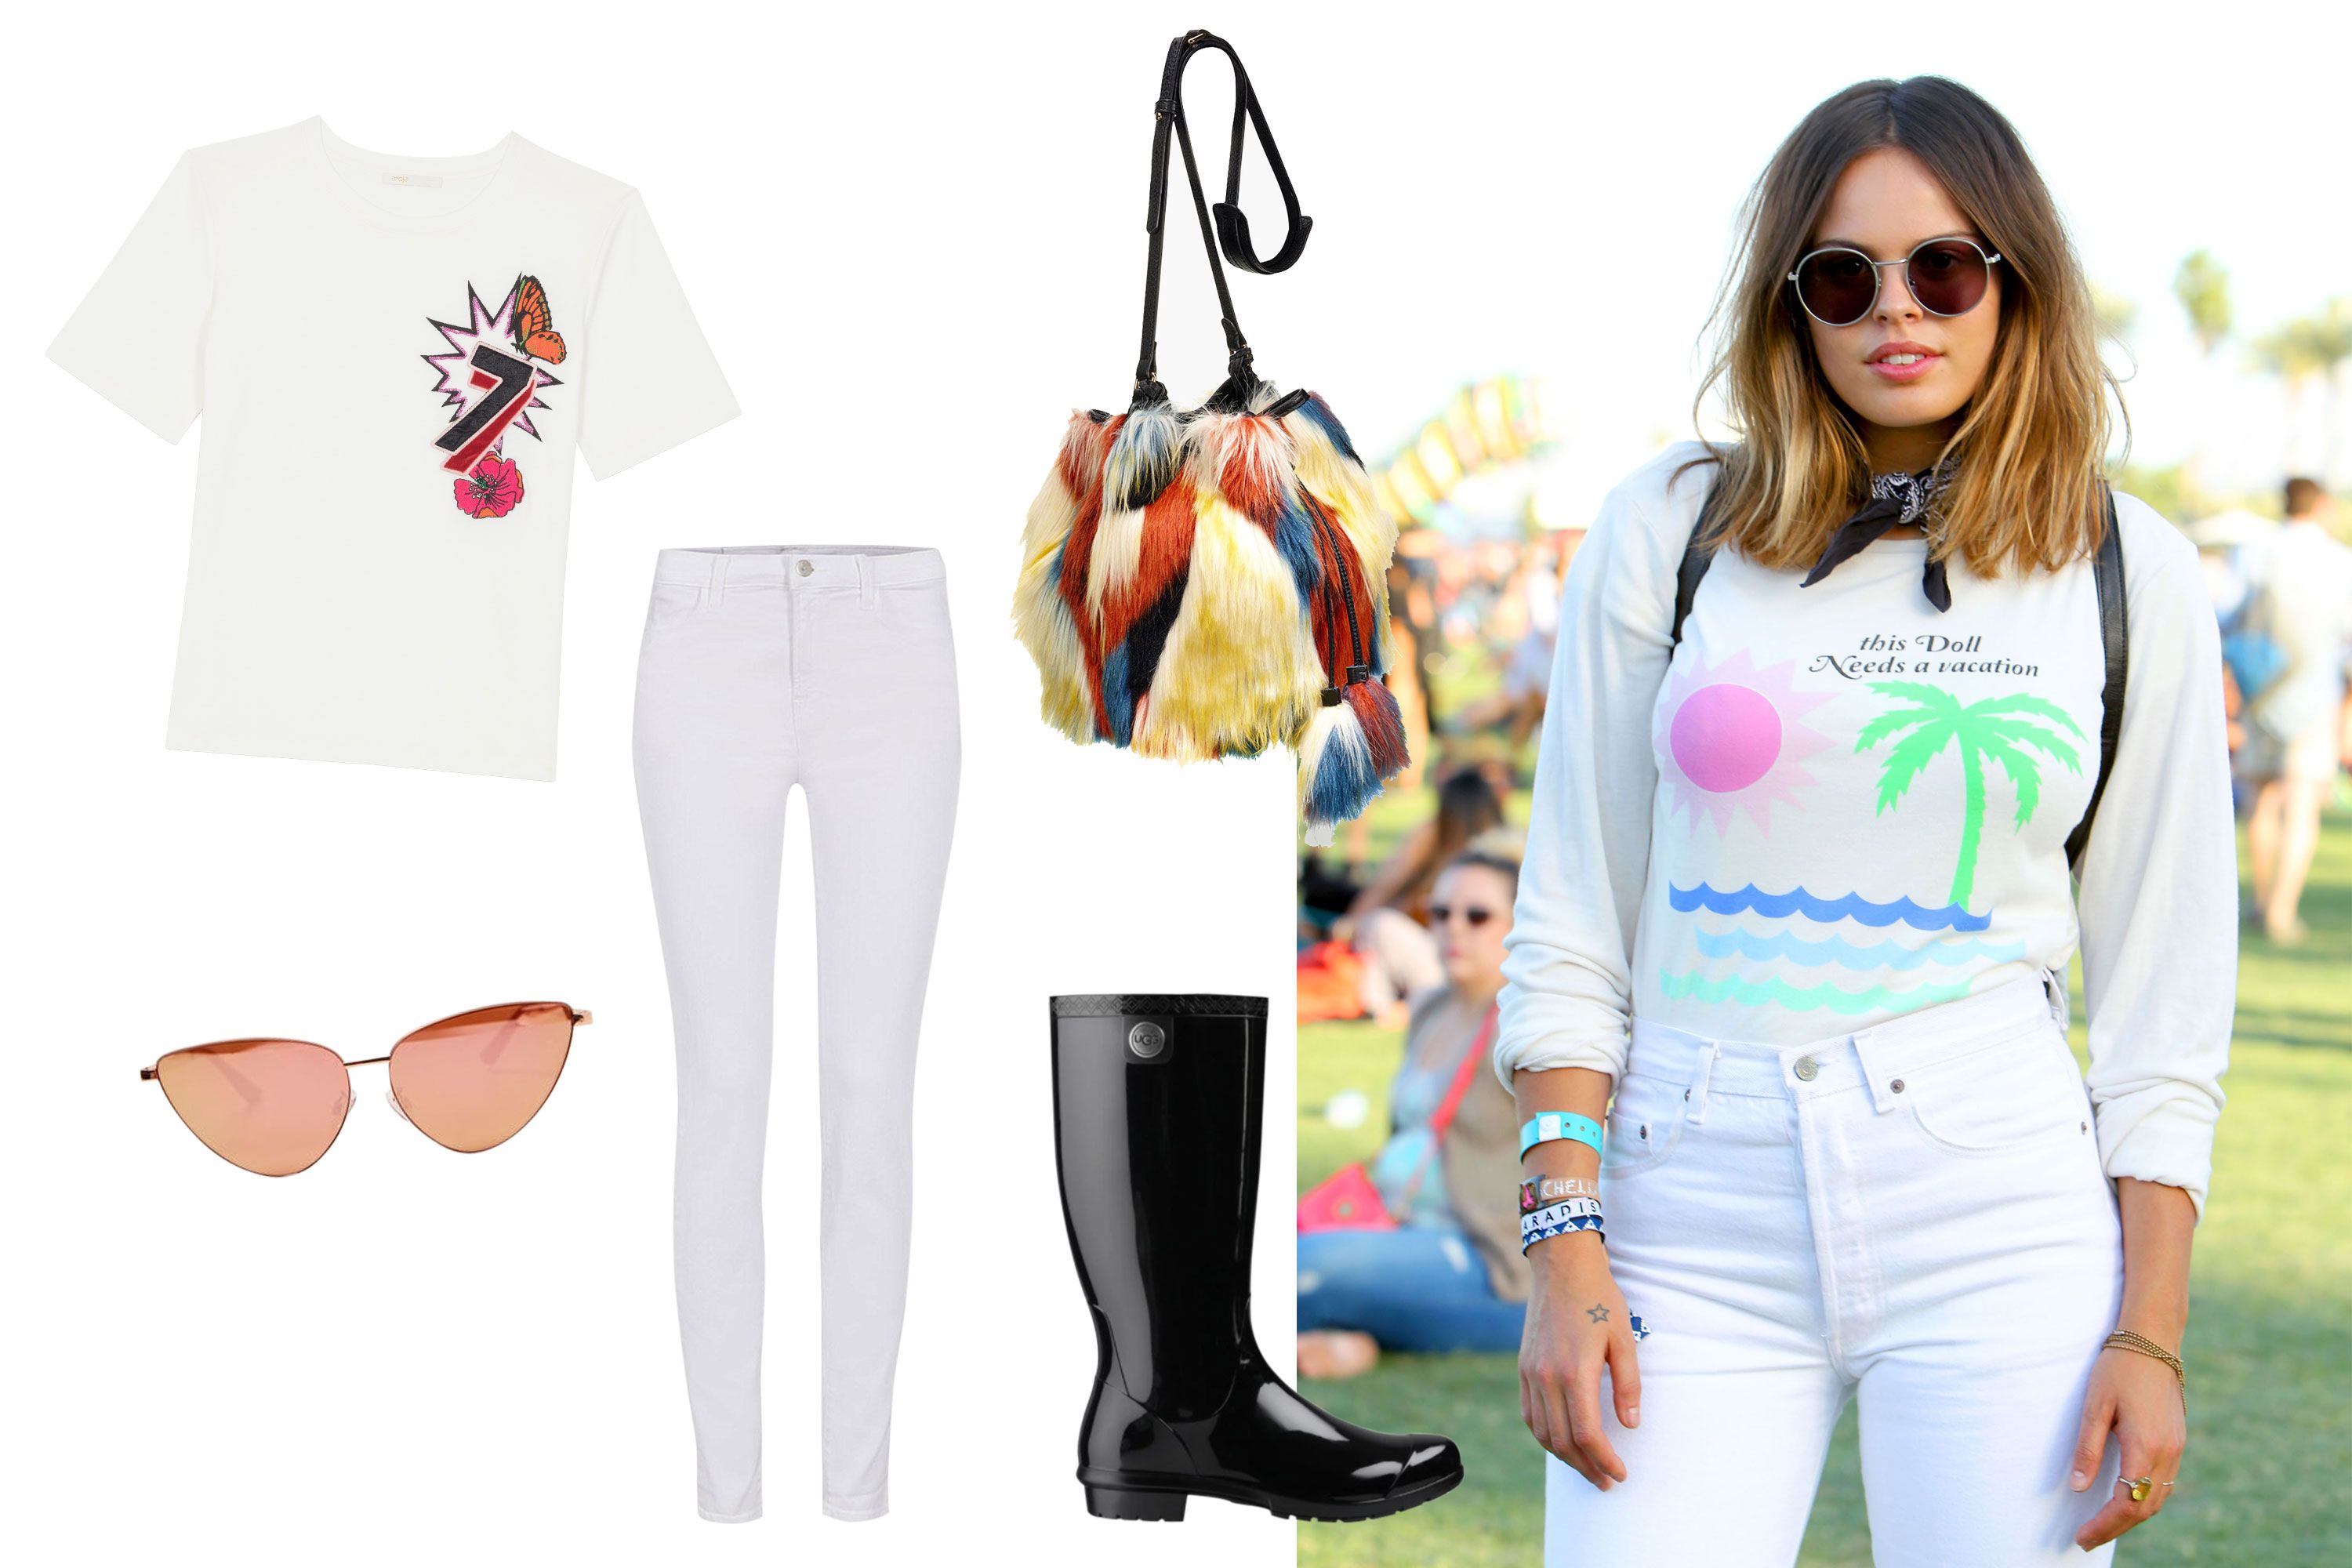 5 FESTIVAL OUTFITS TO UP YOUR FESTIVAL STYLE GAME